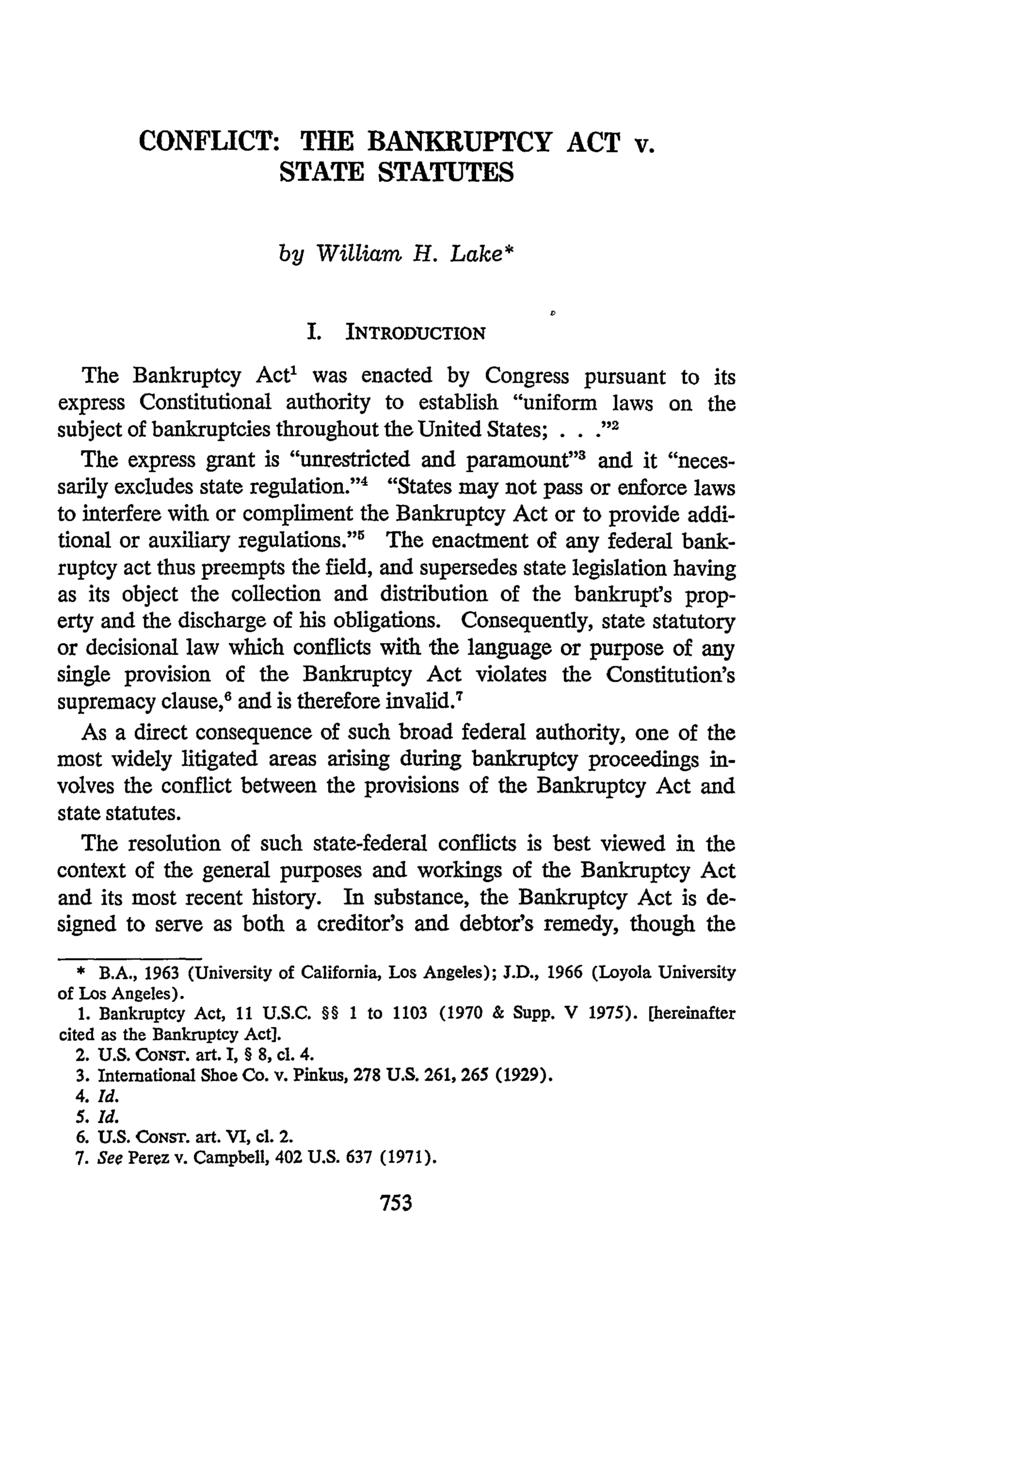 CONFLICT: THE BANKRUPTCY ACT v. STATE STATUTES by William H. Lake* I.